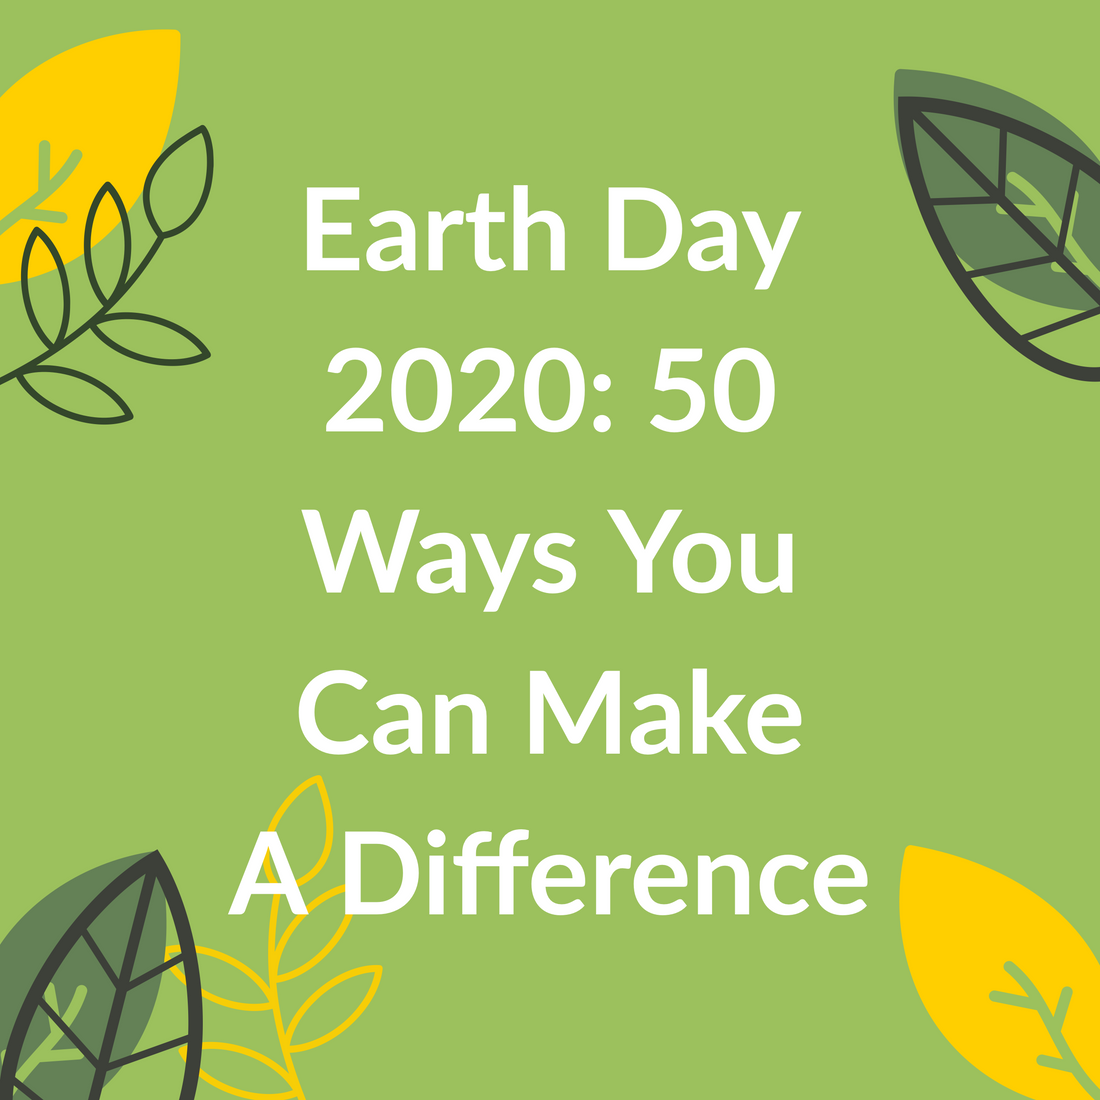 Earth Day 2020: 50 Ways You Can Make a Difference Amid COVID19